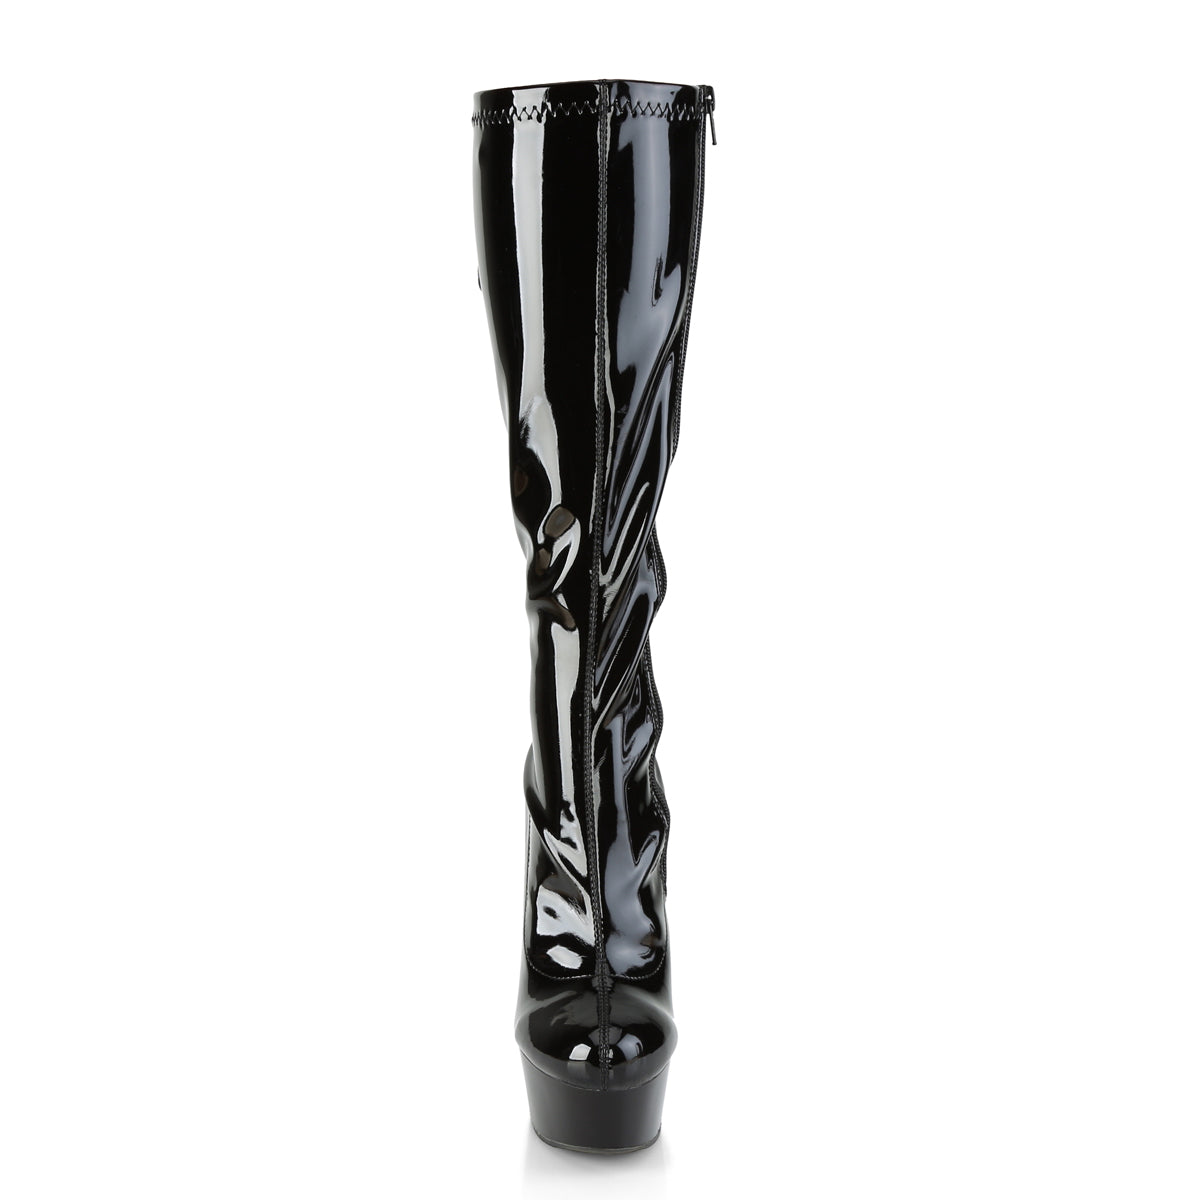 DELIGHT-2029 Pleaser Black Stretch Patent/Black Platform Shoes [Sexy Knee High Boots]